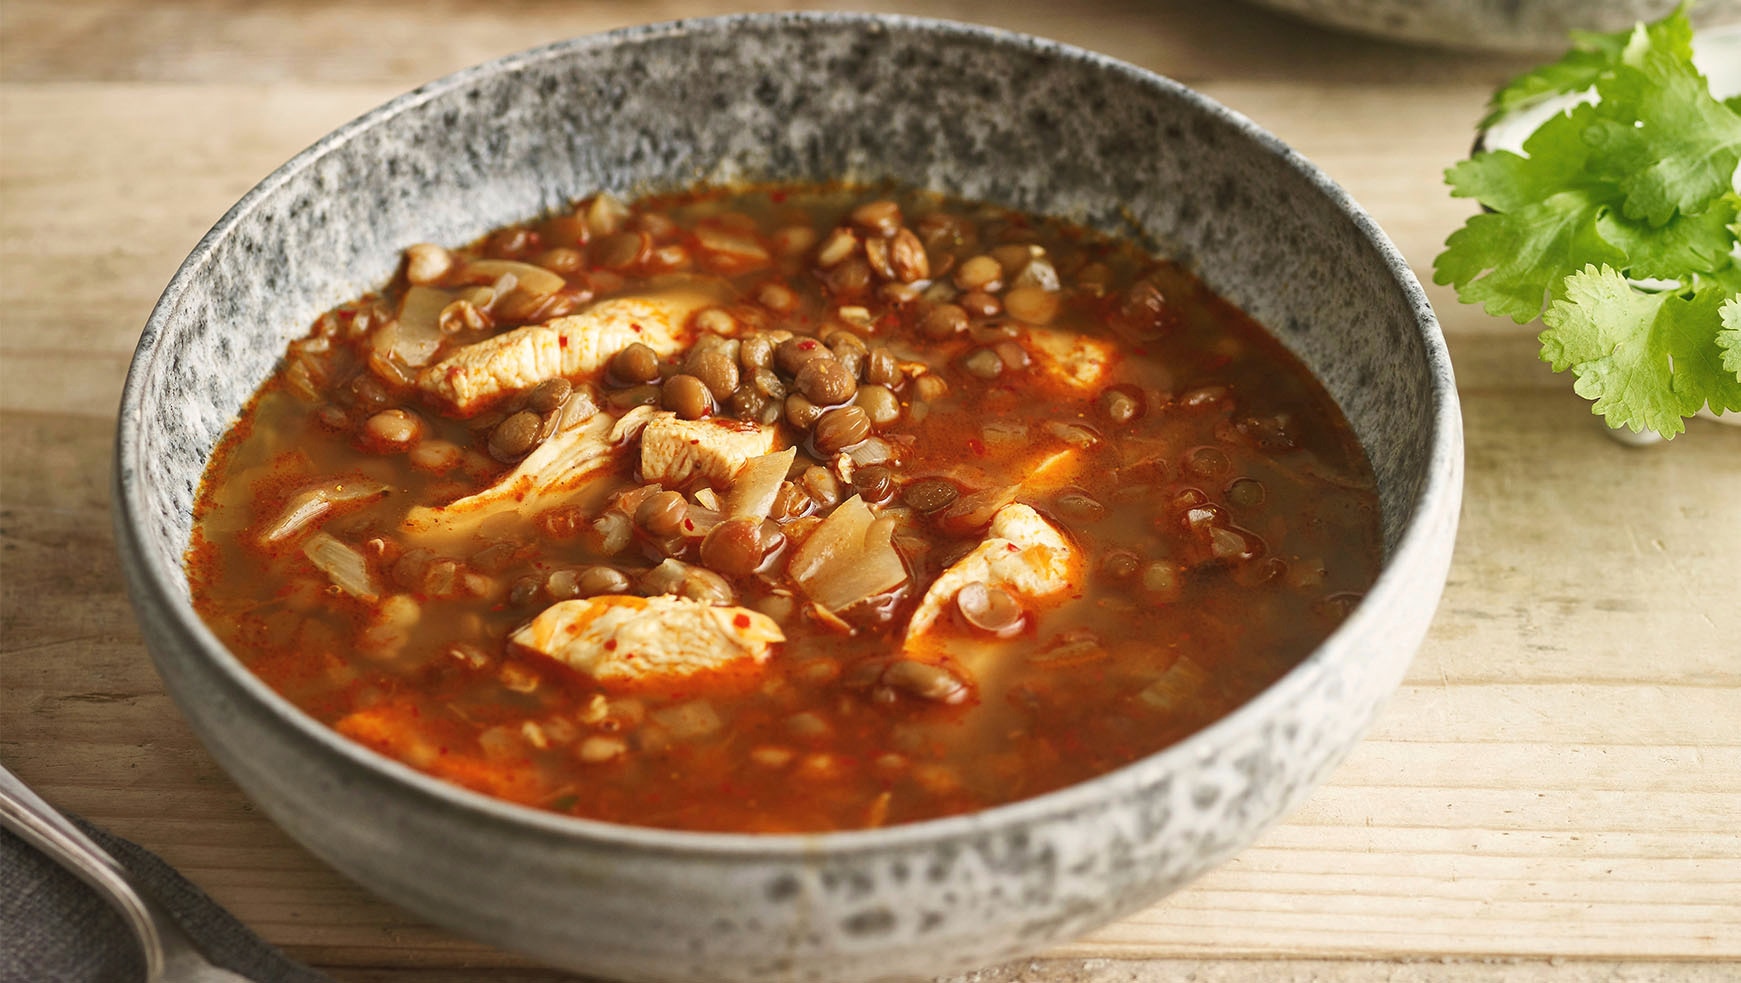 Simple soup ideas to up your protein